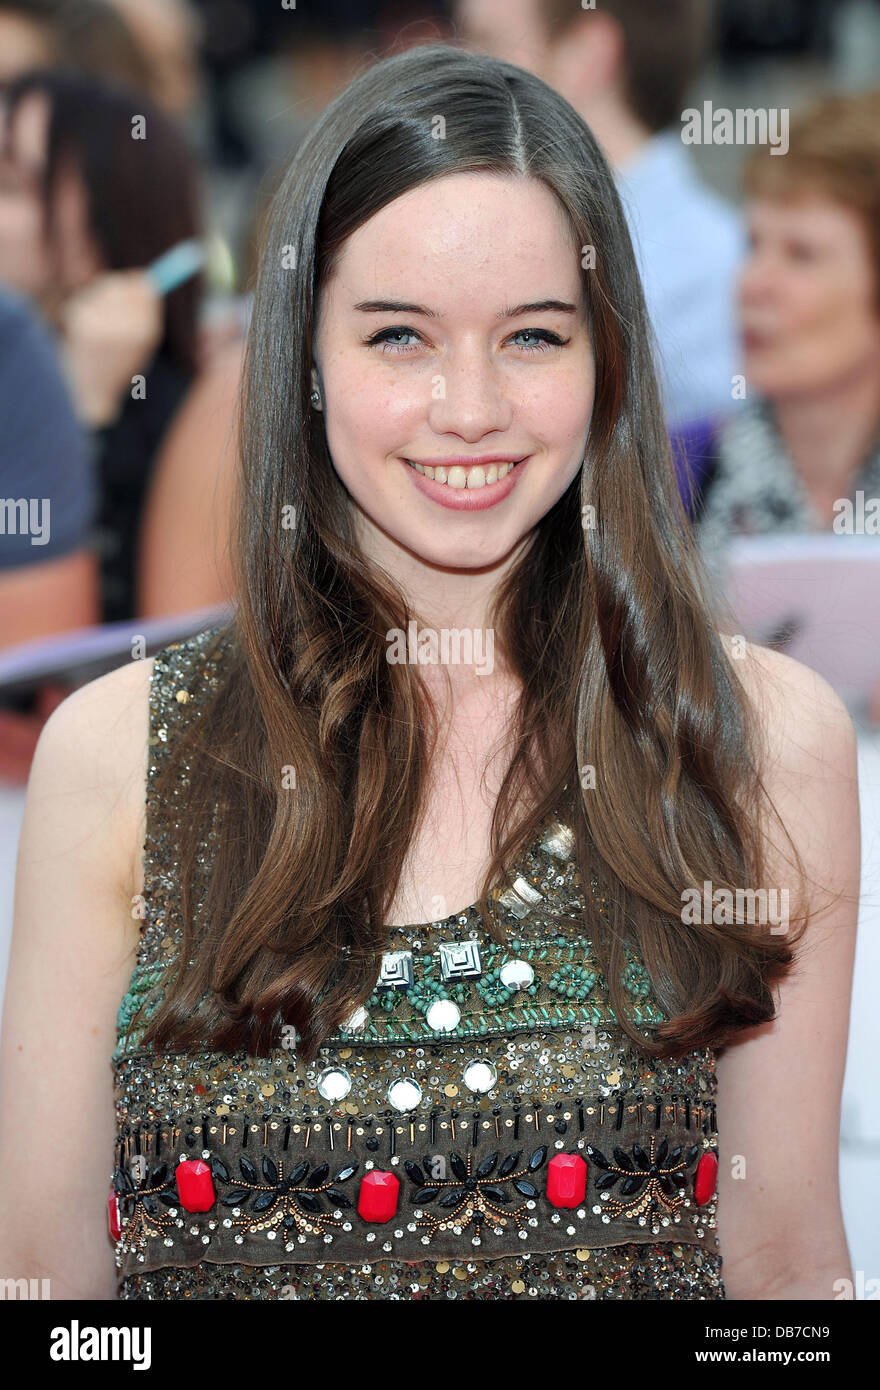 Georgie Henley National Movie Awards held at the Wembley Arena - Arrivals. London, England - 11.05.11 Stock Photo